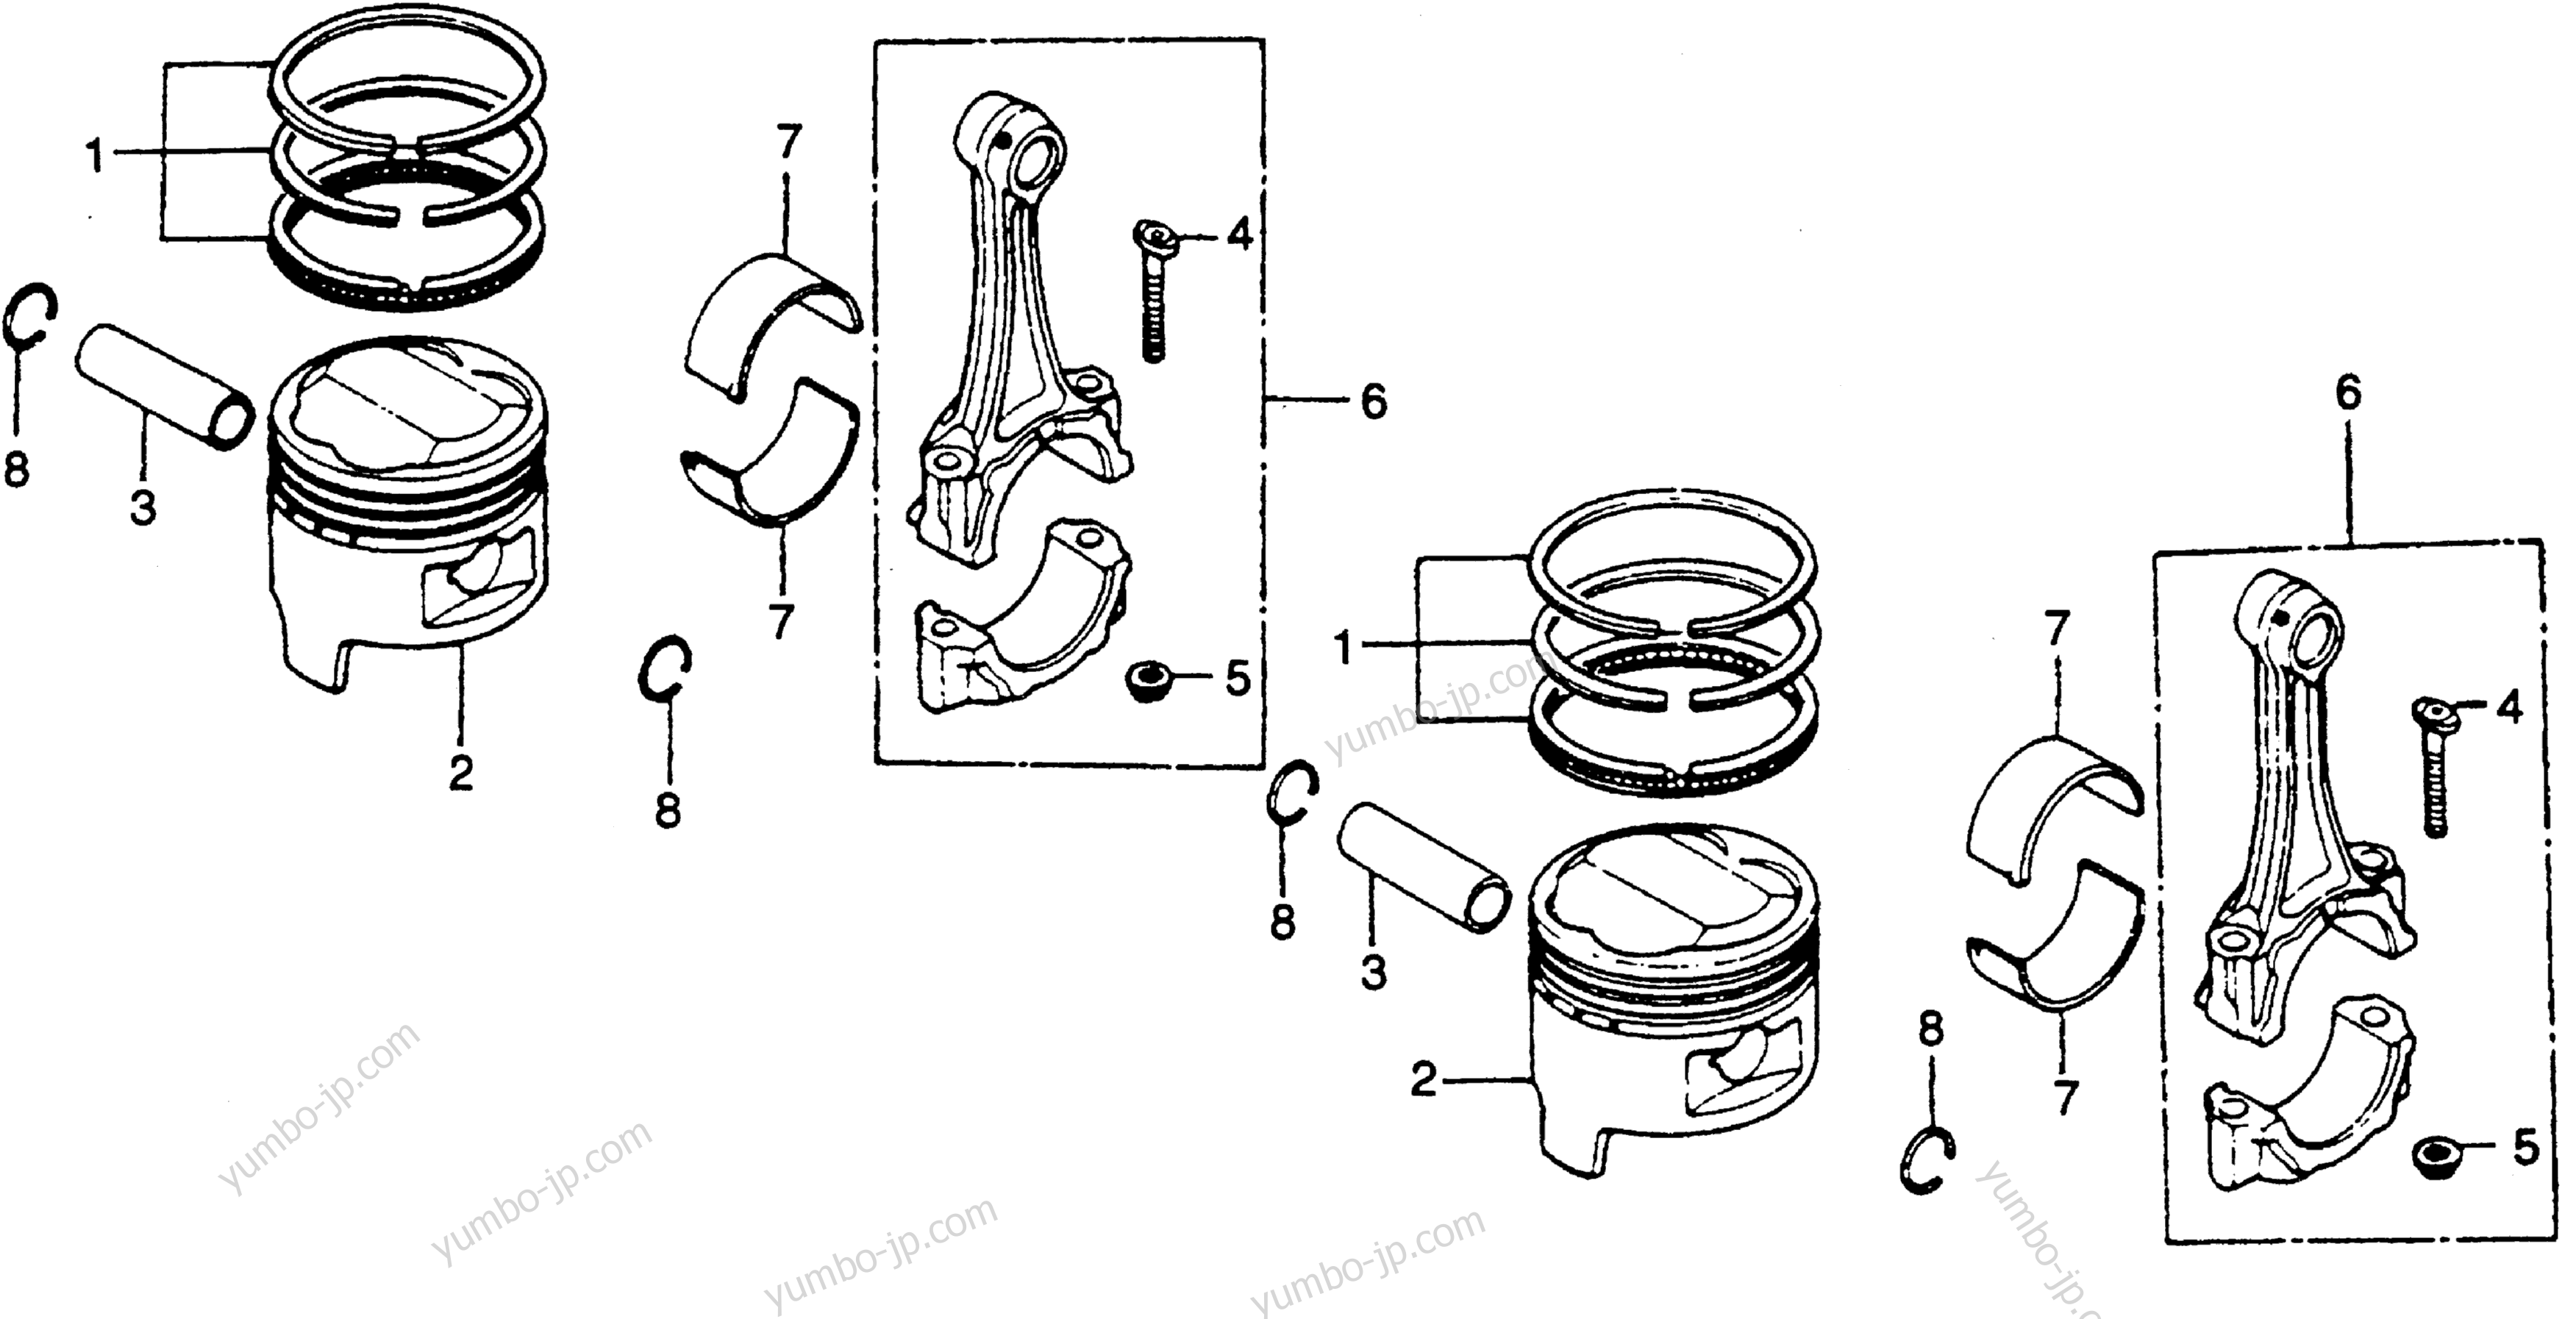 PISTON / CONNECTING ROD for motorcycles HONDA CB400TI A 1979 year